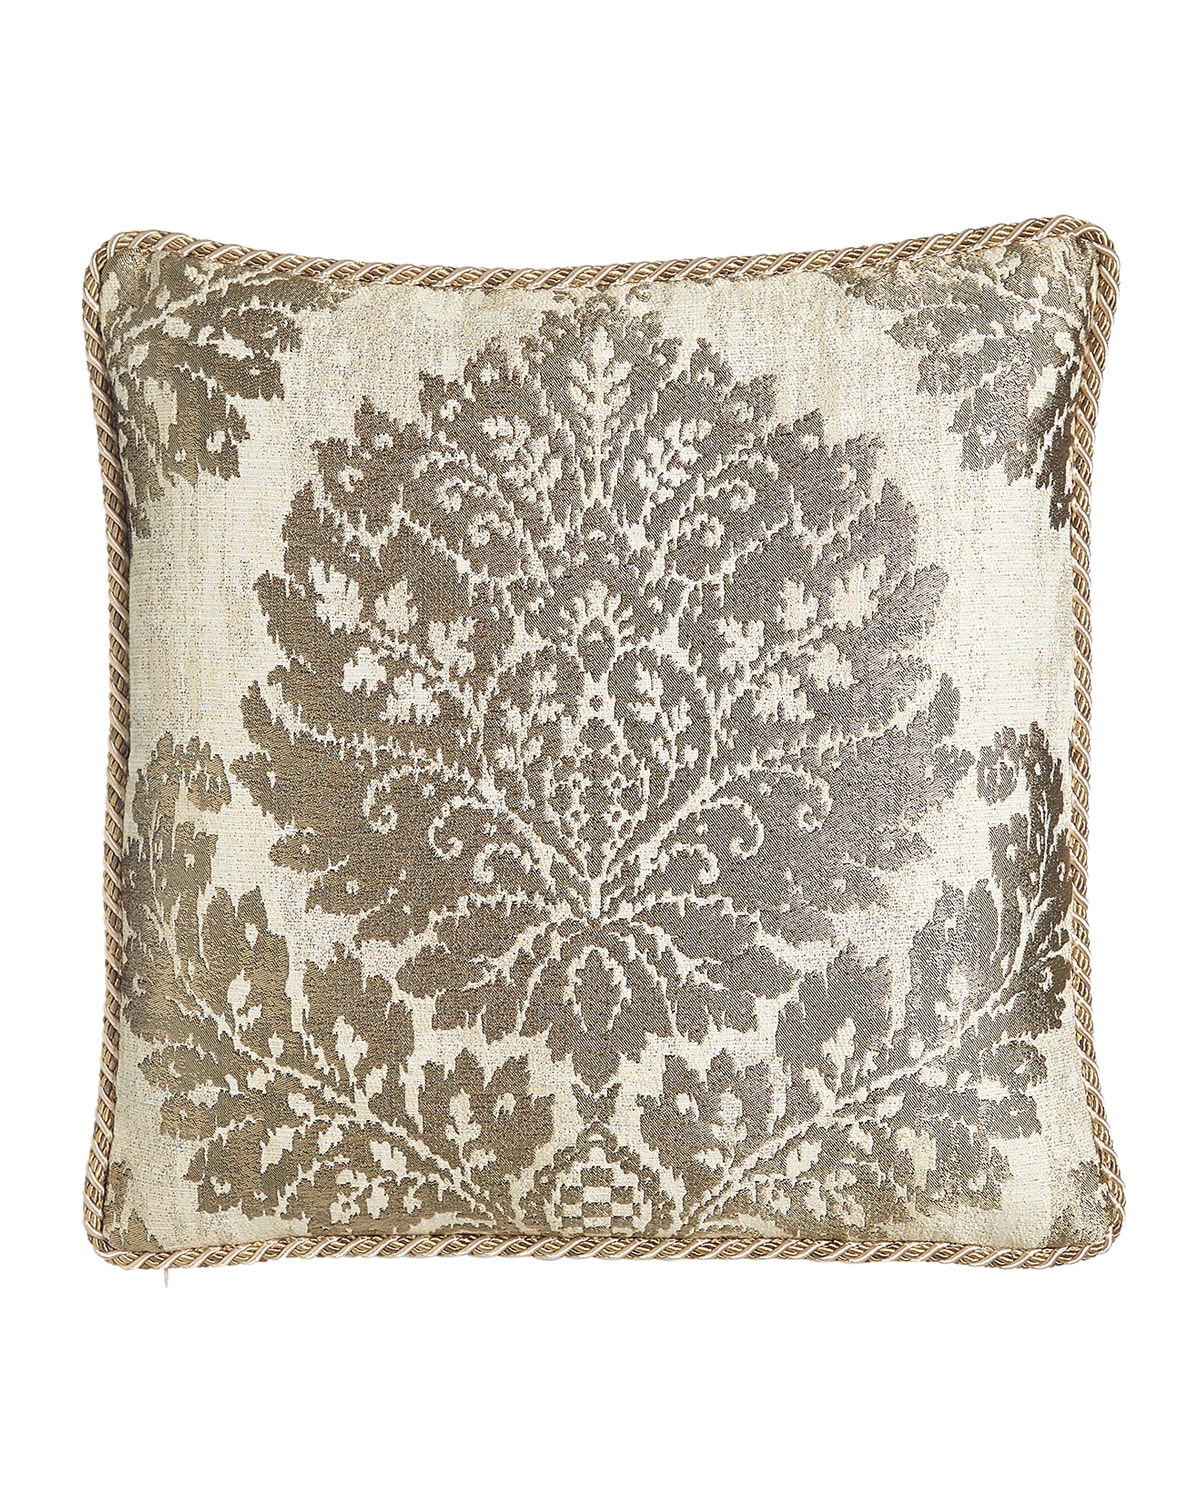 Austin Horn Collection Vienna Reversible Pillow, 20"sq.